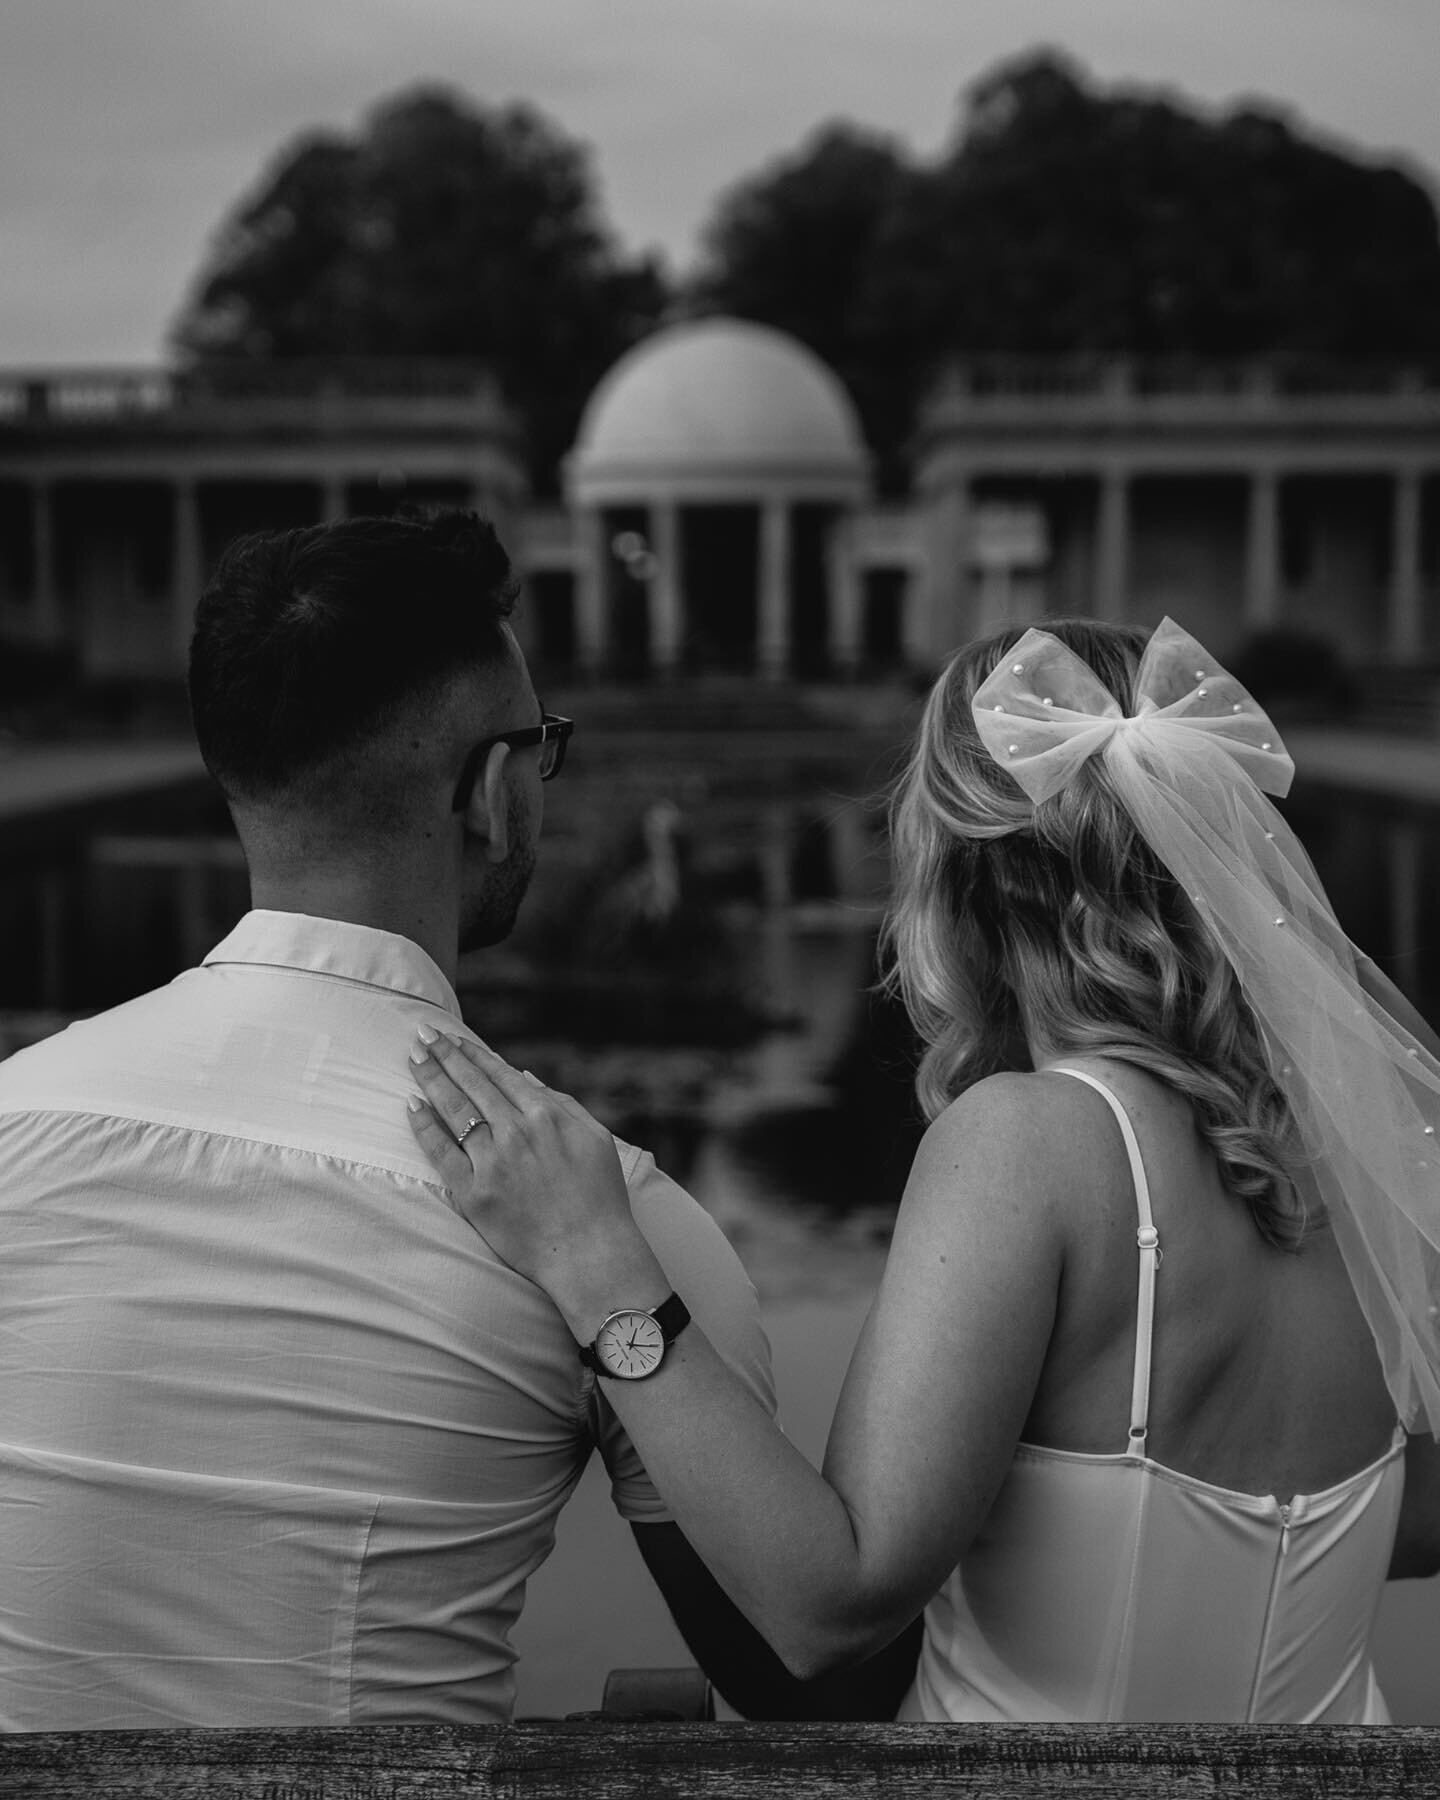 Yay it&rsquo;s Beckiee&rsquo;s turn! After being an incredible planner for so many brides it&rsquo;s time to also plan her own day with Harry. 
I used to shoot at Eaton park a lot but I&rsquo;d kind of forgotten what an incredible backdrop for photos